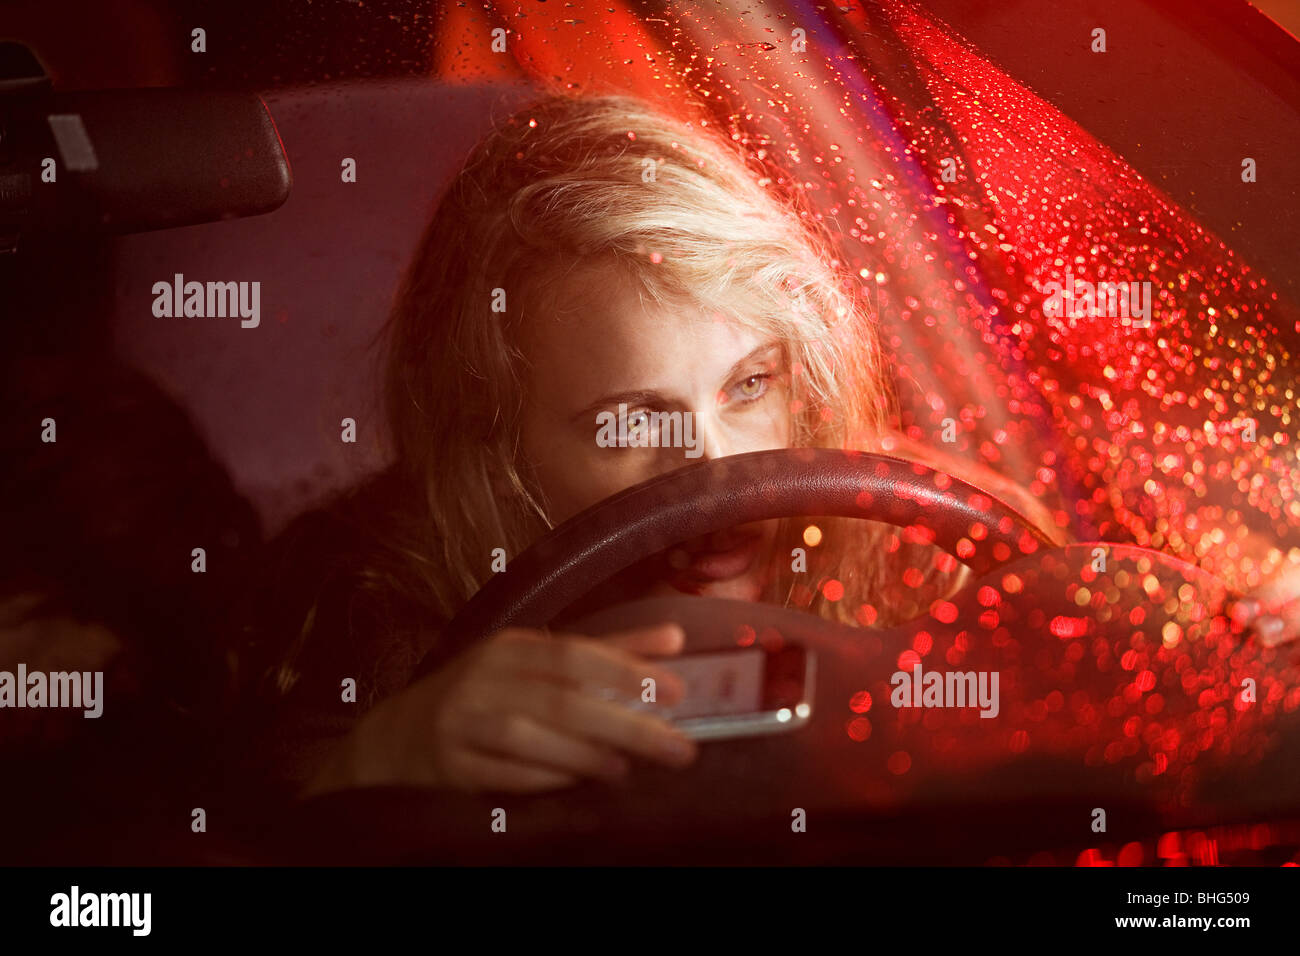 Young woman in car accident Stock Photo